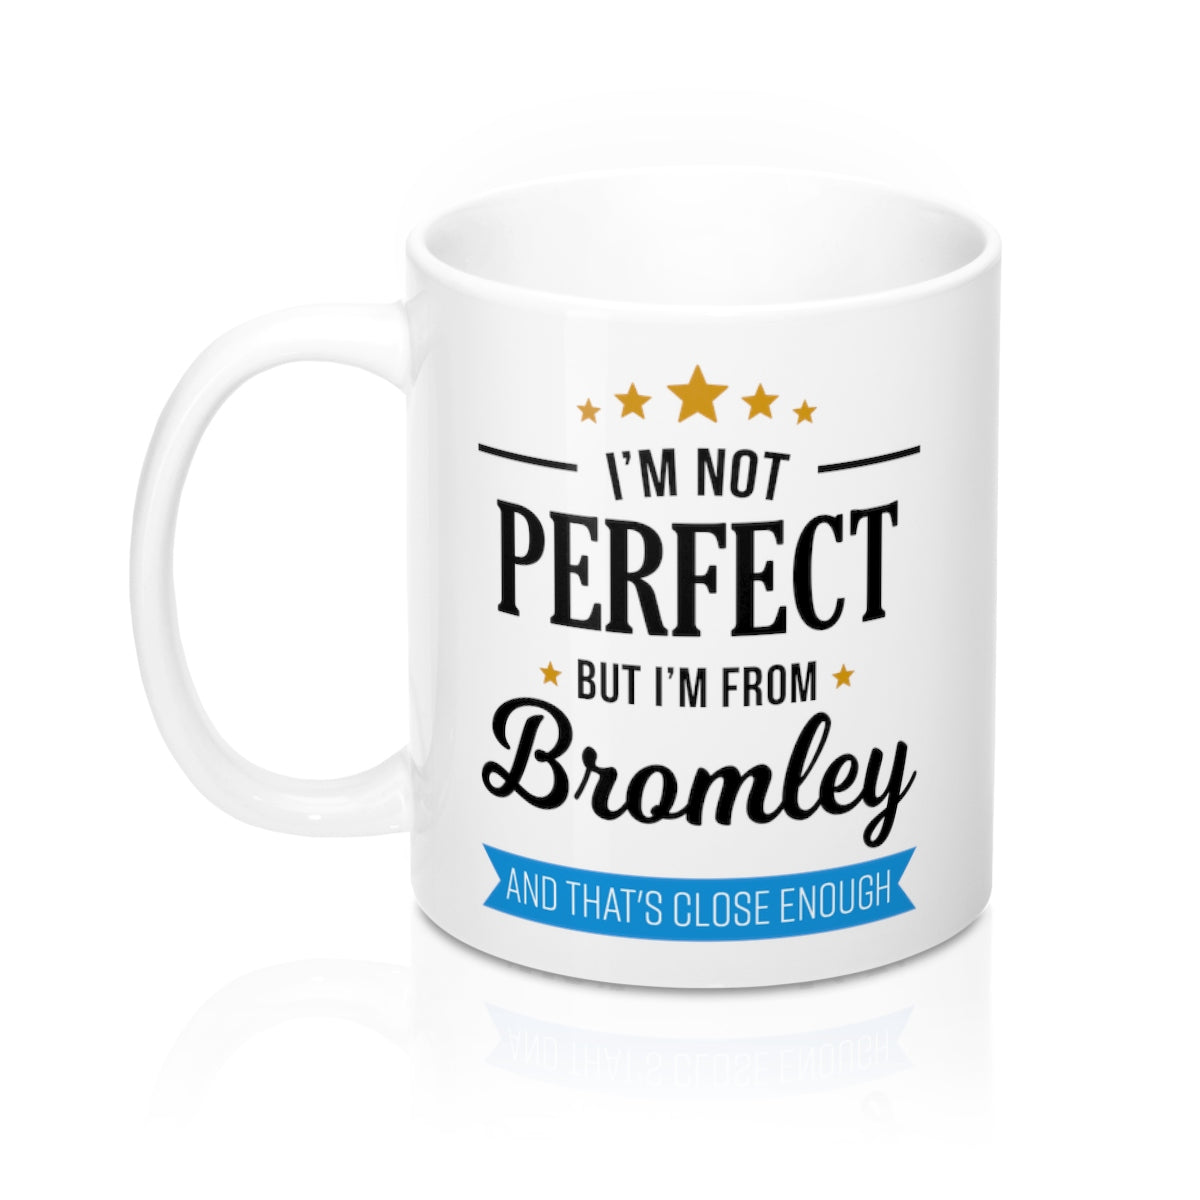 I'm Not Perfect But I'm From Bromley Mug